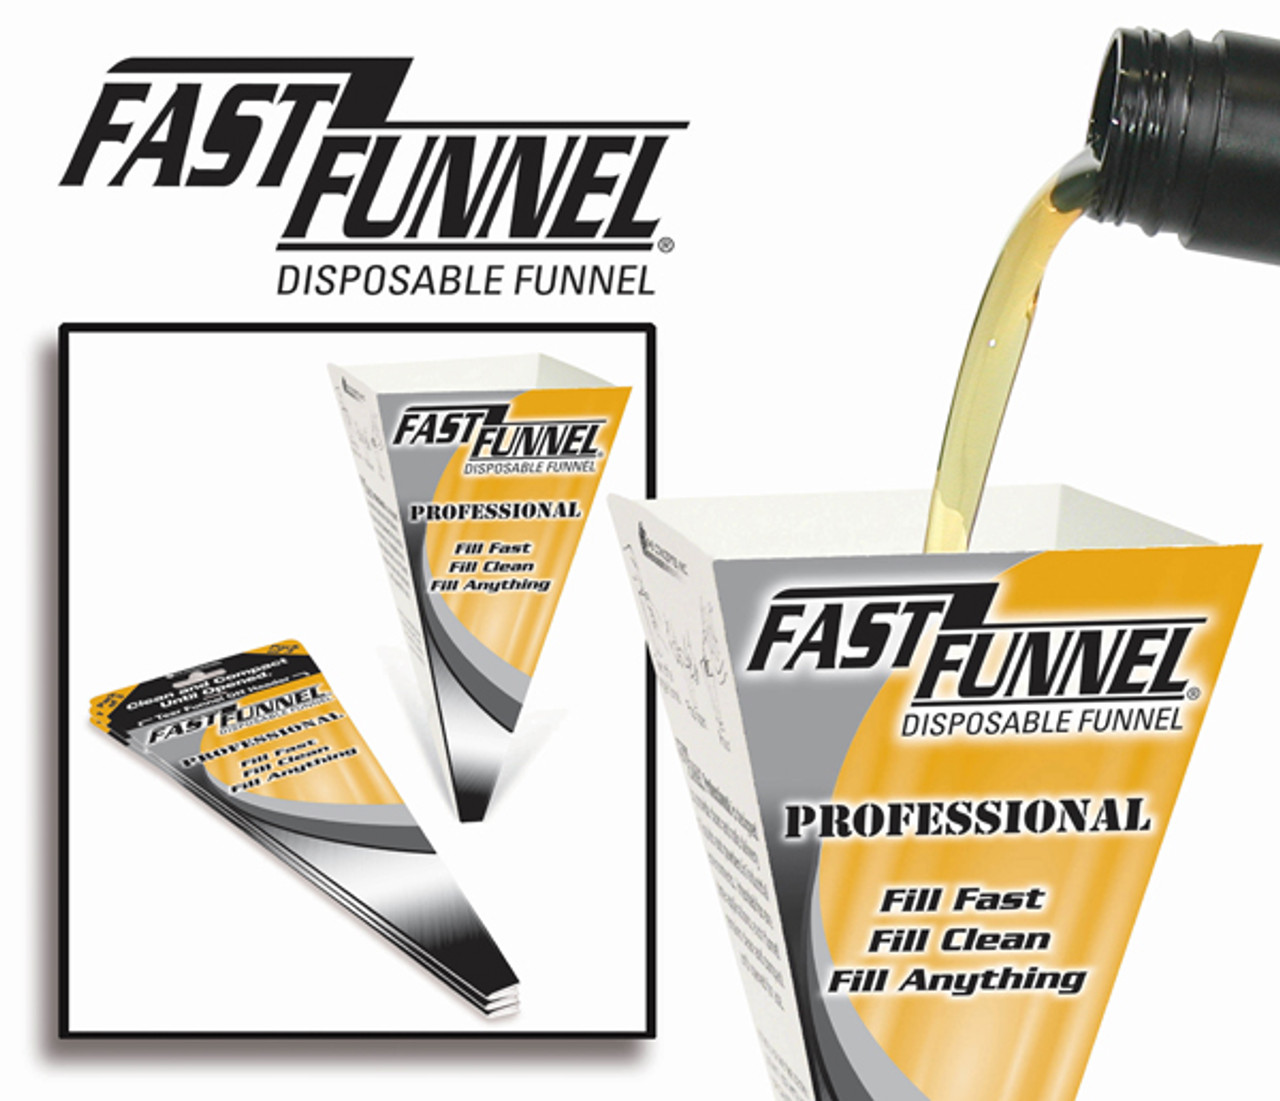 Fast Funnel Disposable Funnel